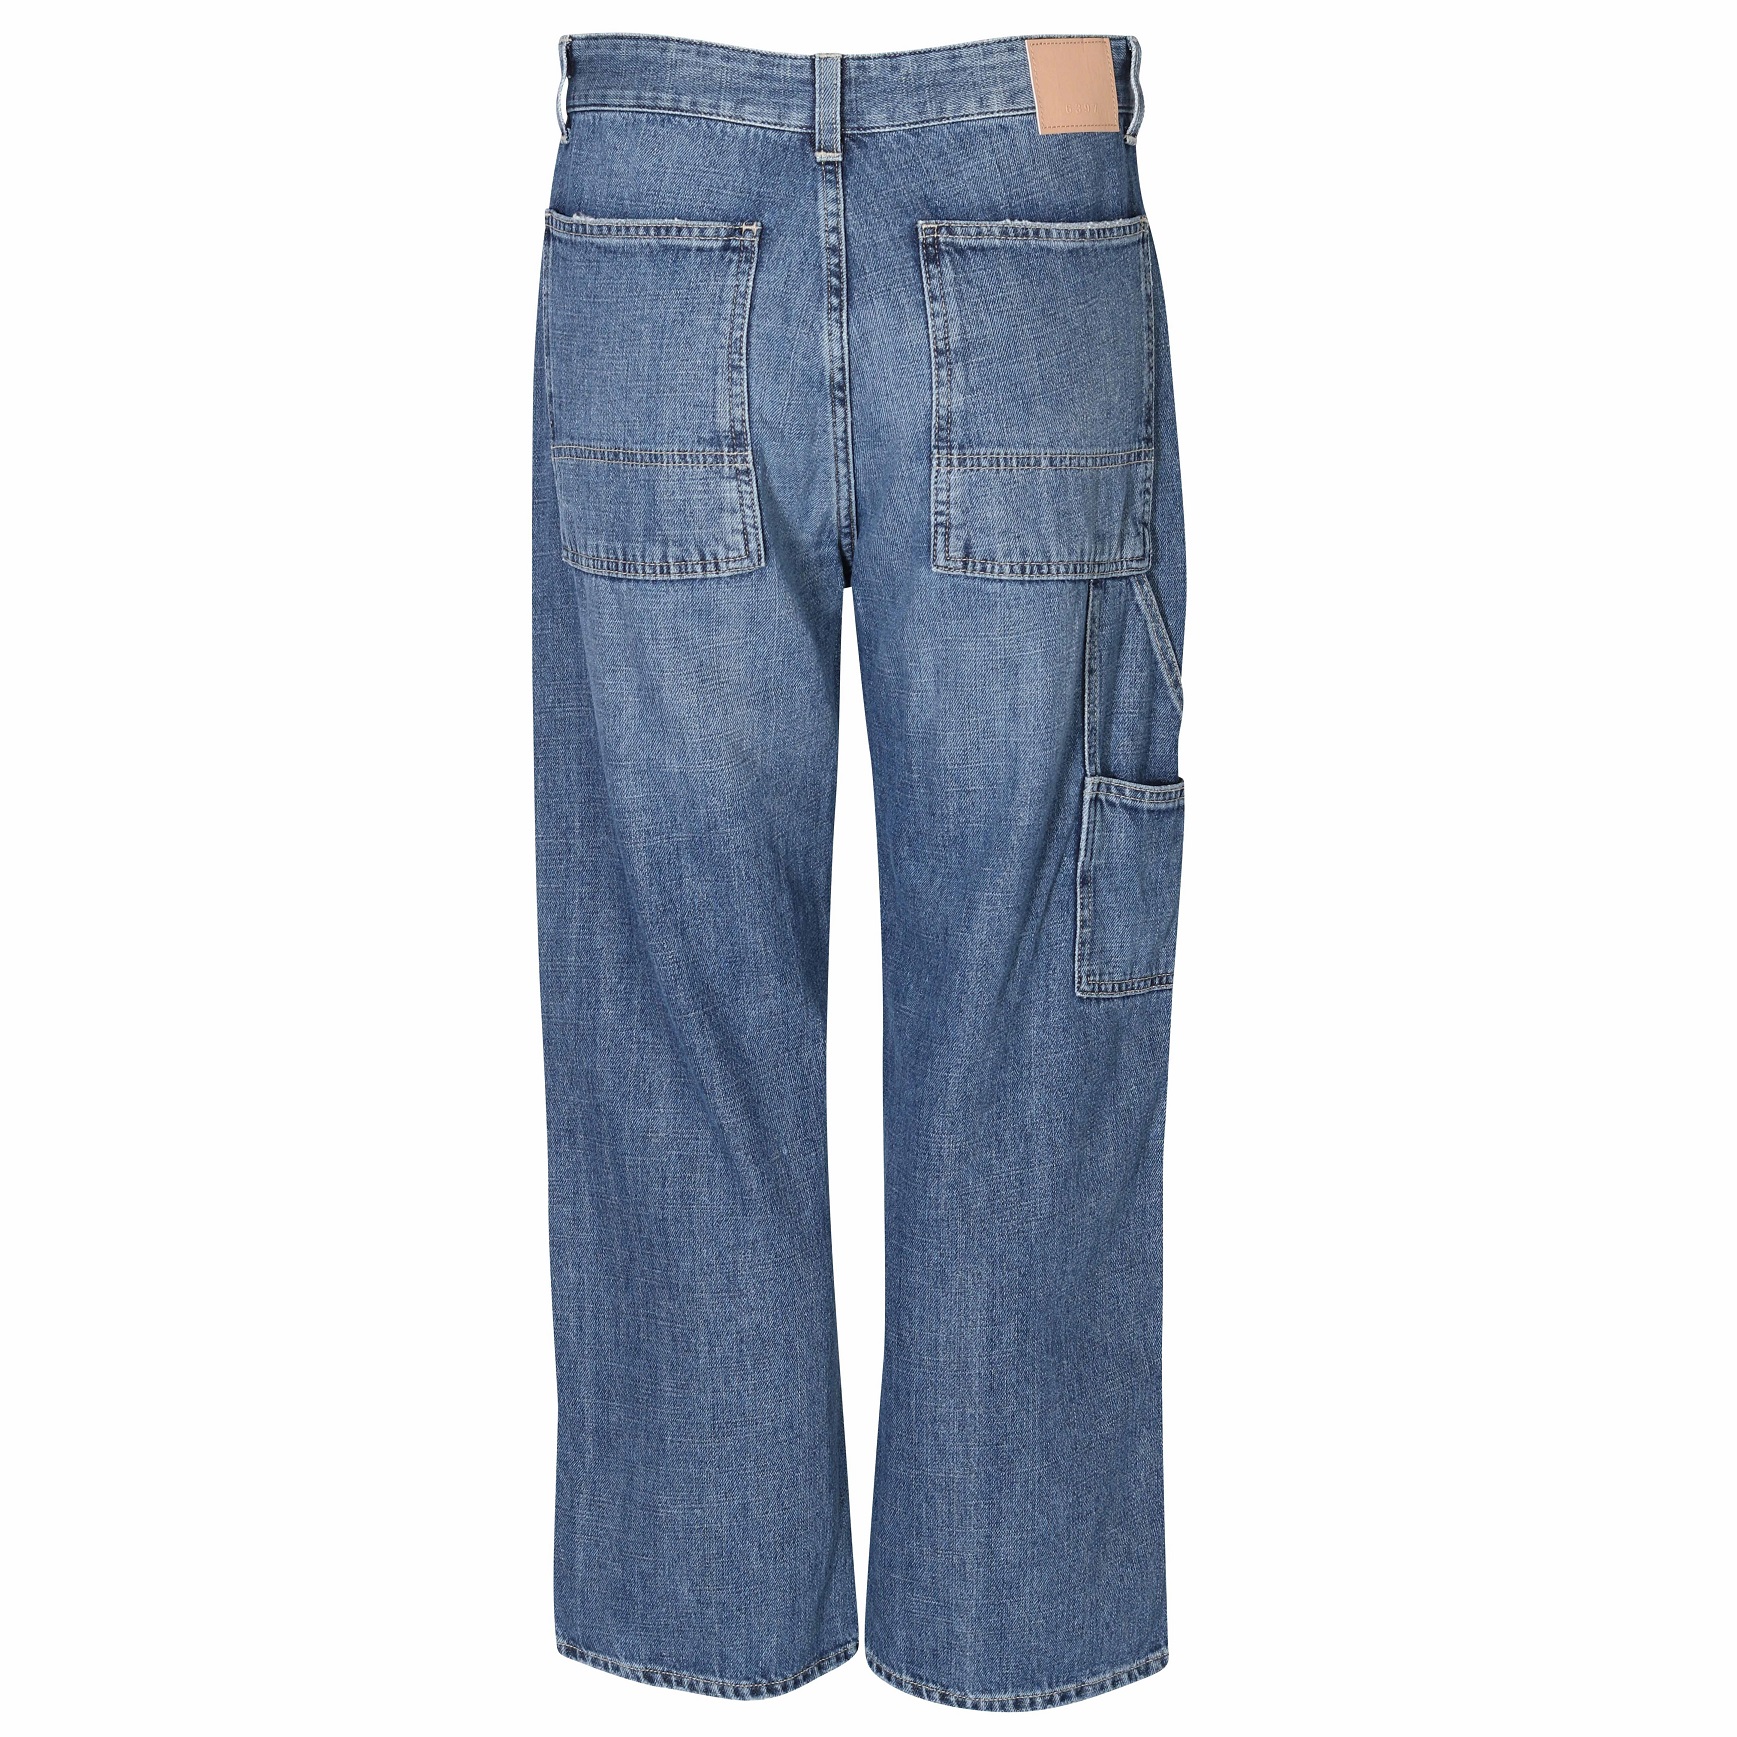 6397 The Painter Jeans in Worn Blue